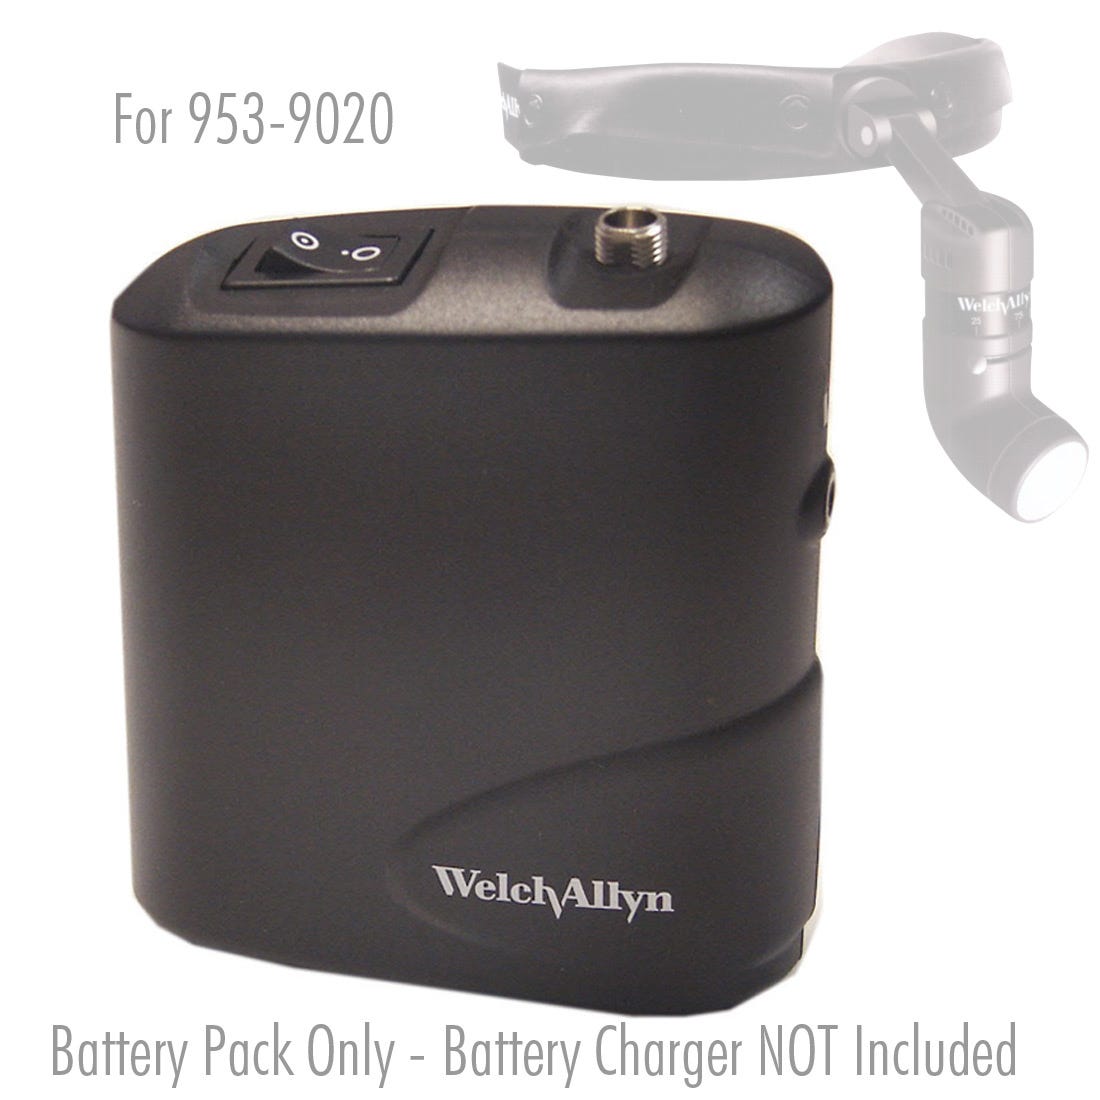 Portable Power Source Only for Welch Allyn Procedure Headlight